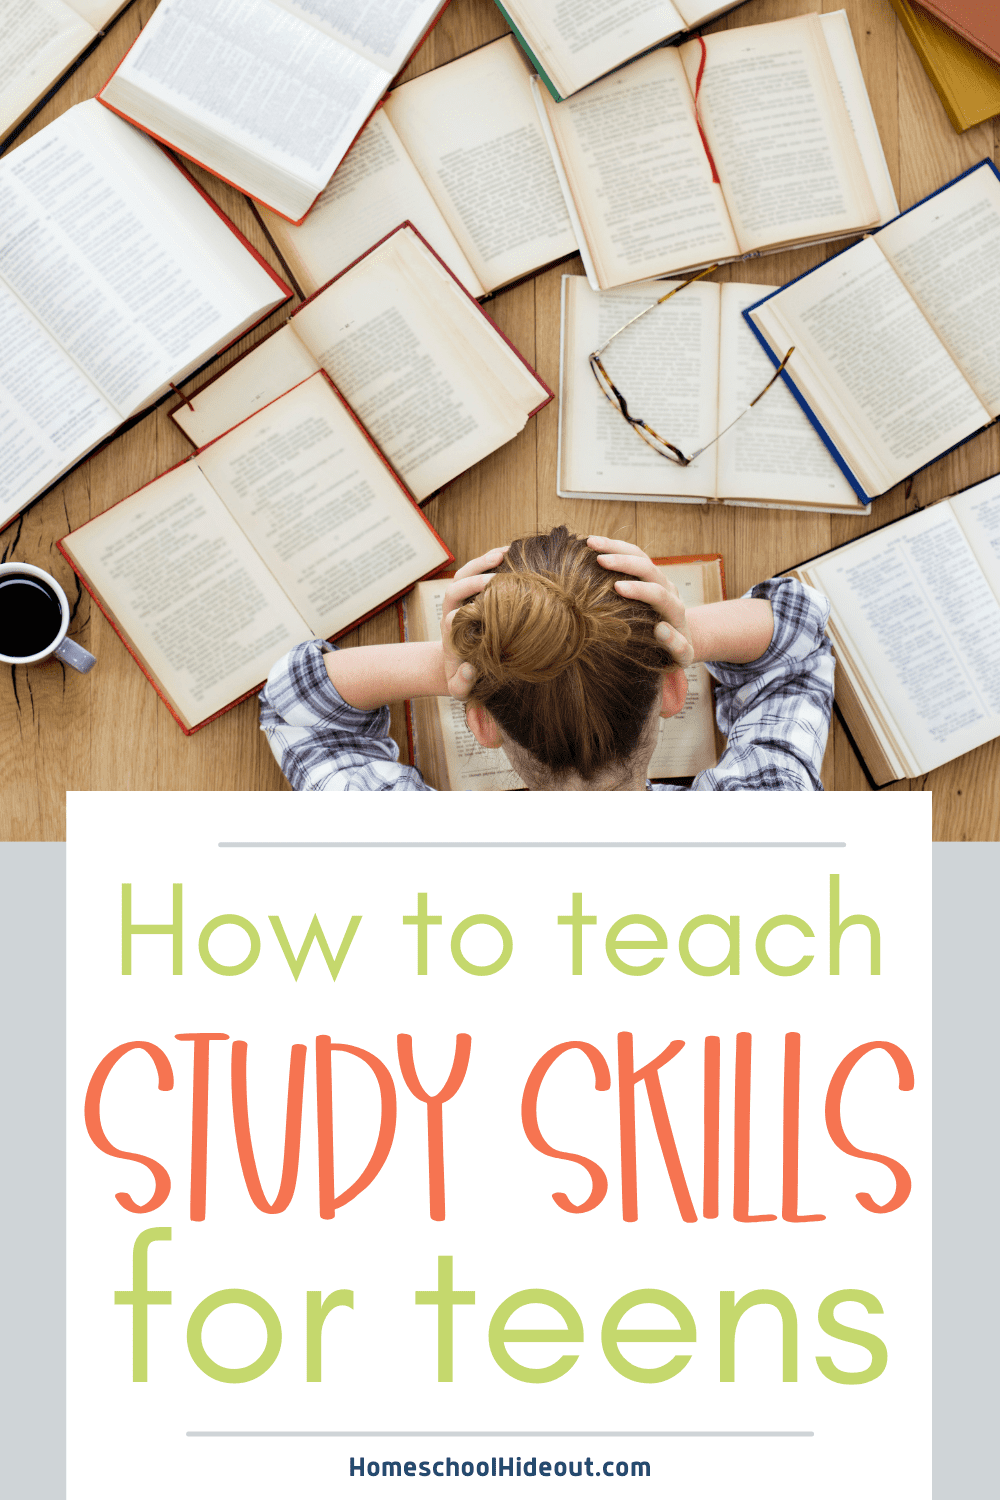 These study skills for teens have been just what my high schooler needed! Hallelujah!